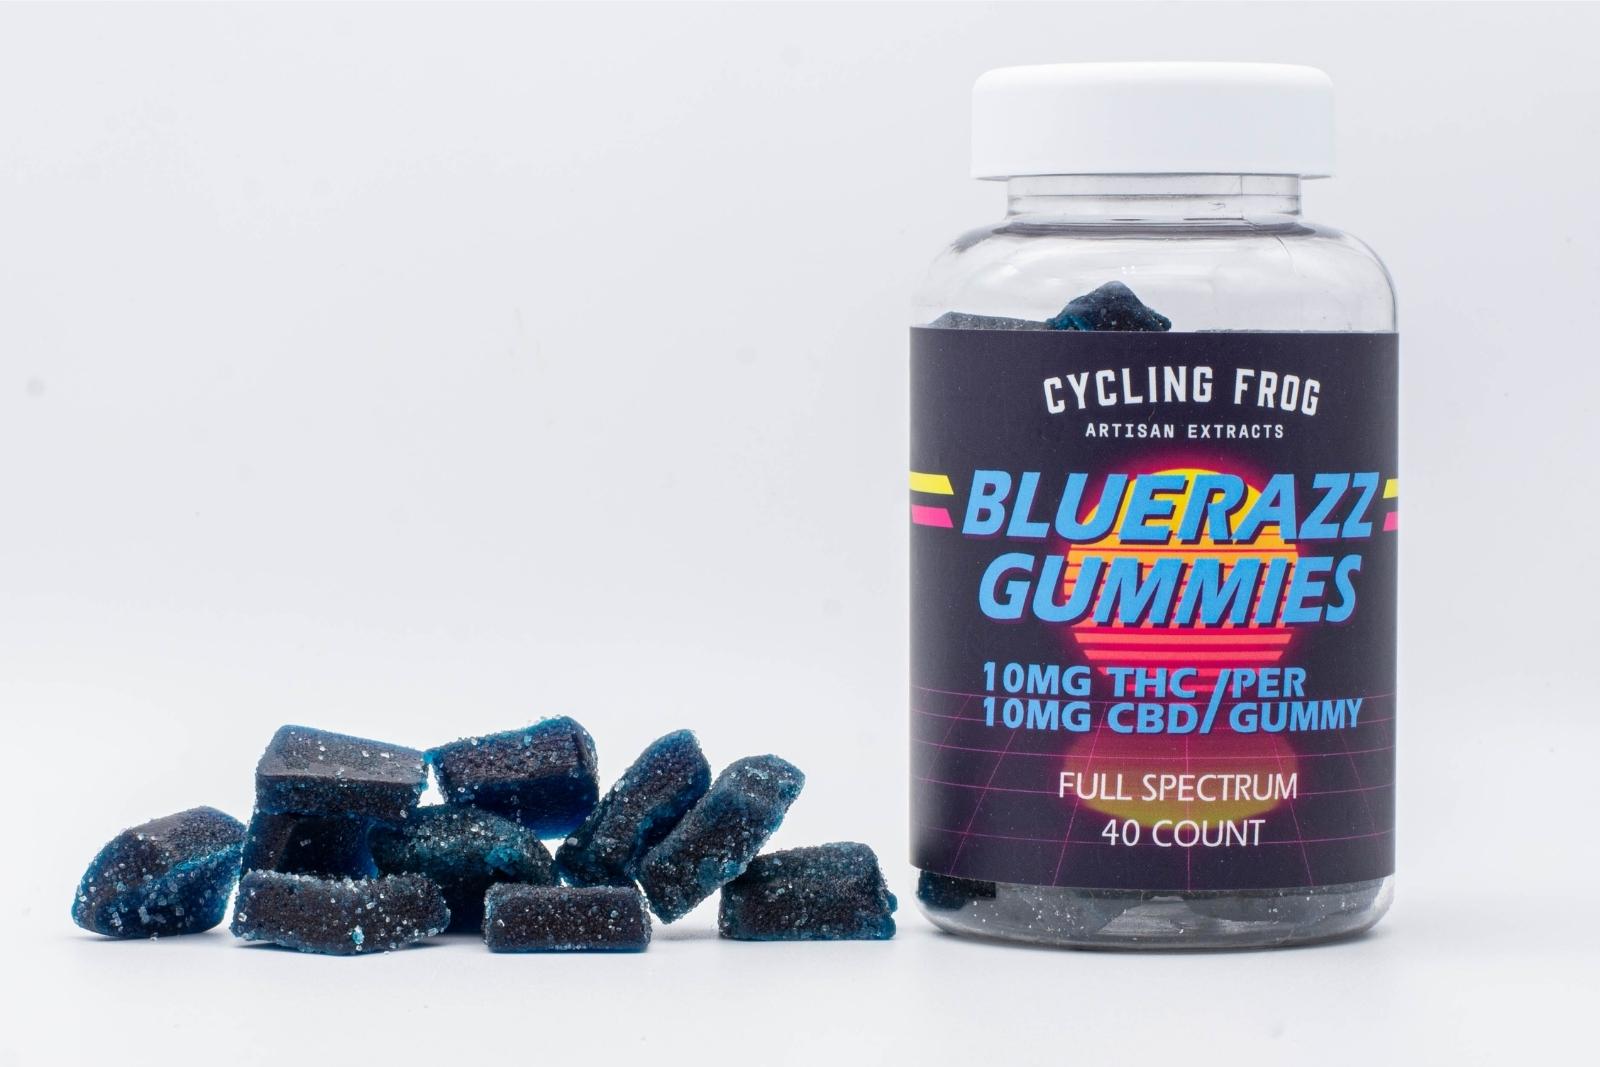 A pile of BlueRazz THC and CBD Gummies by Cycling Frog, next to a 40-count container, on a white background